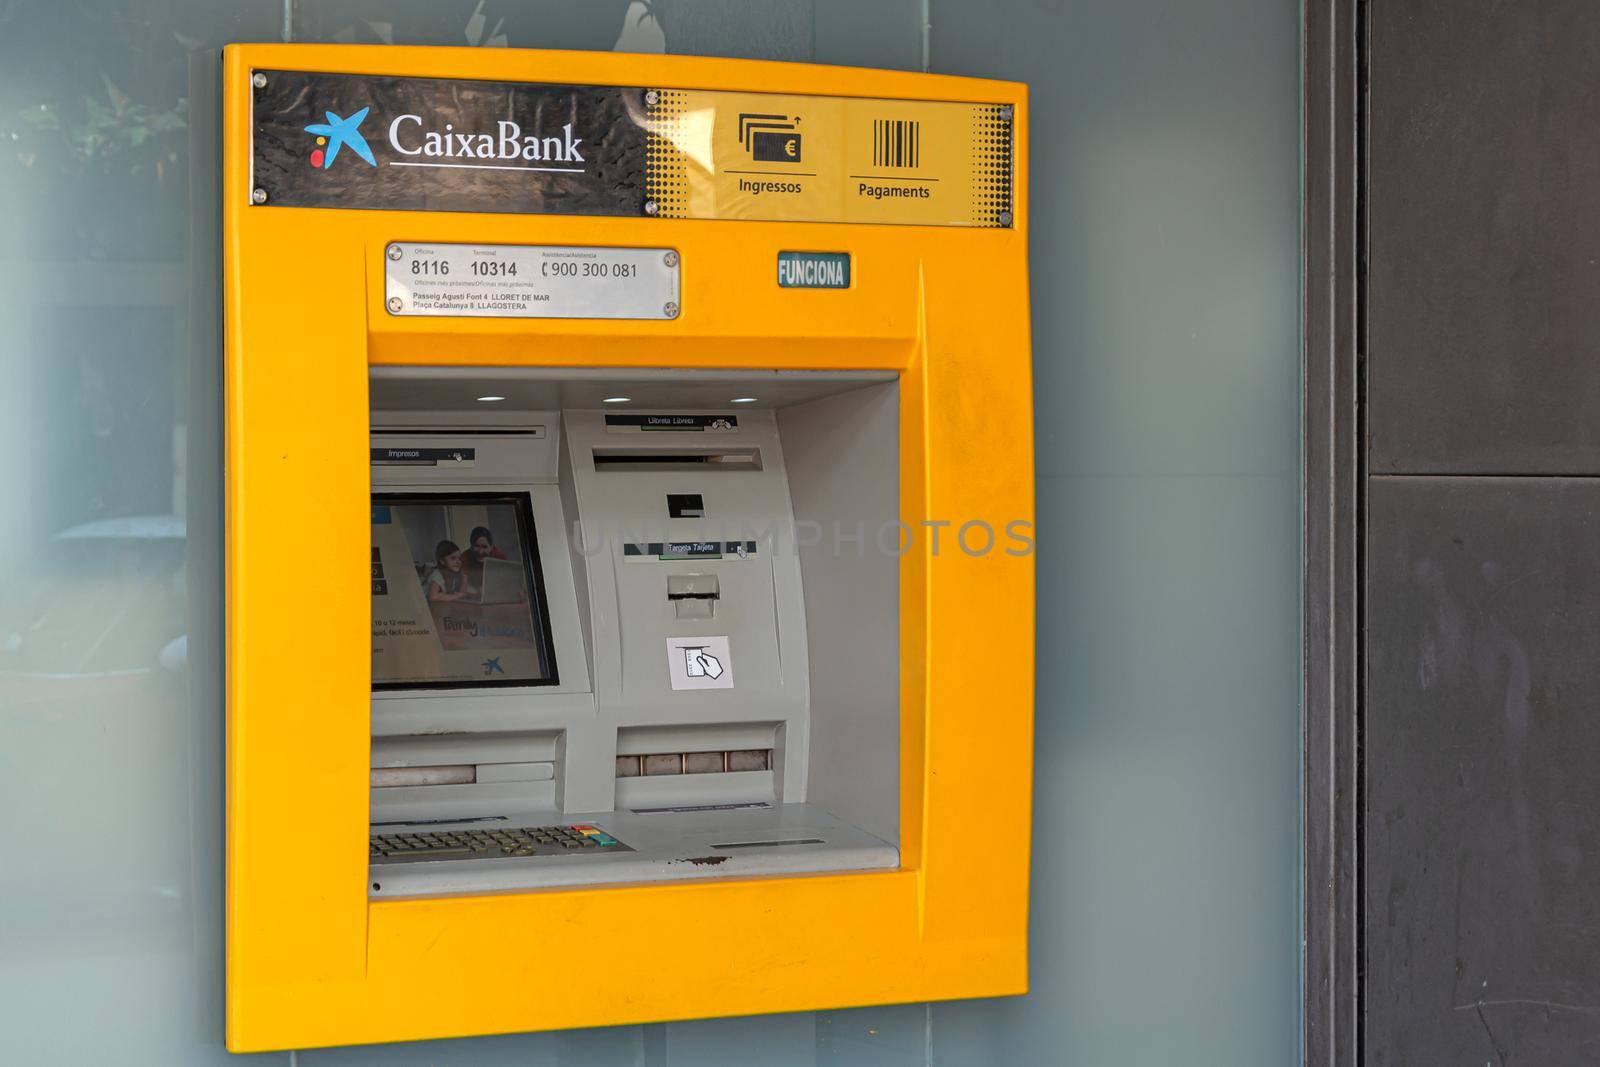 Tossa, Spain - 09/19/2017: via a Wall ATM for cash withdrawal by Grommik